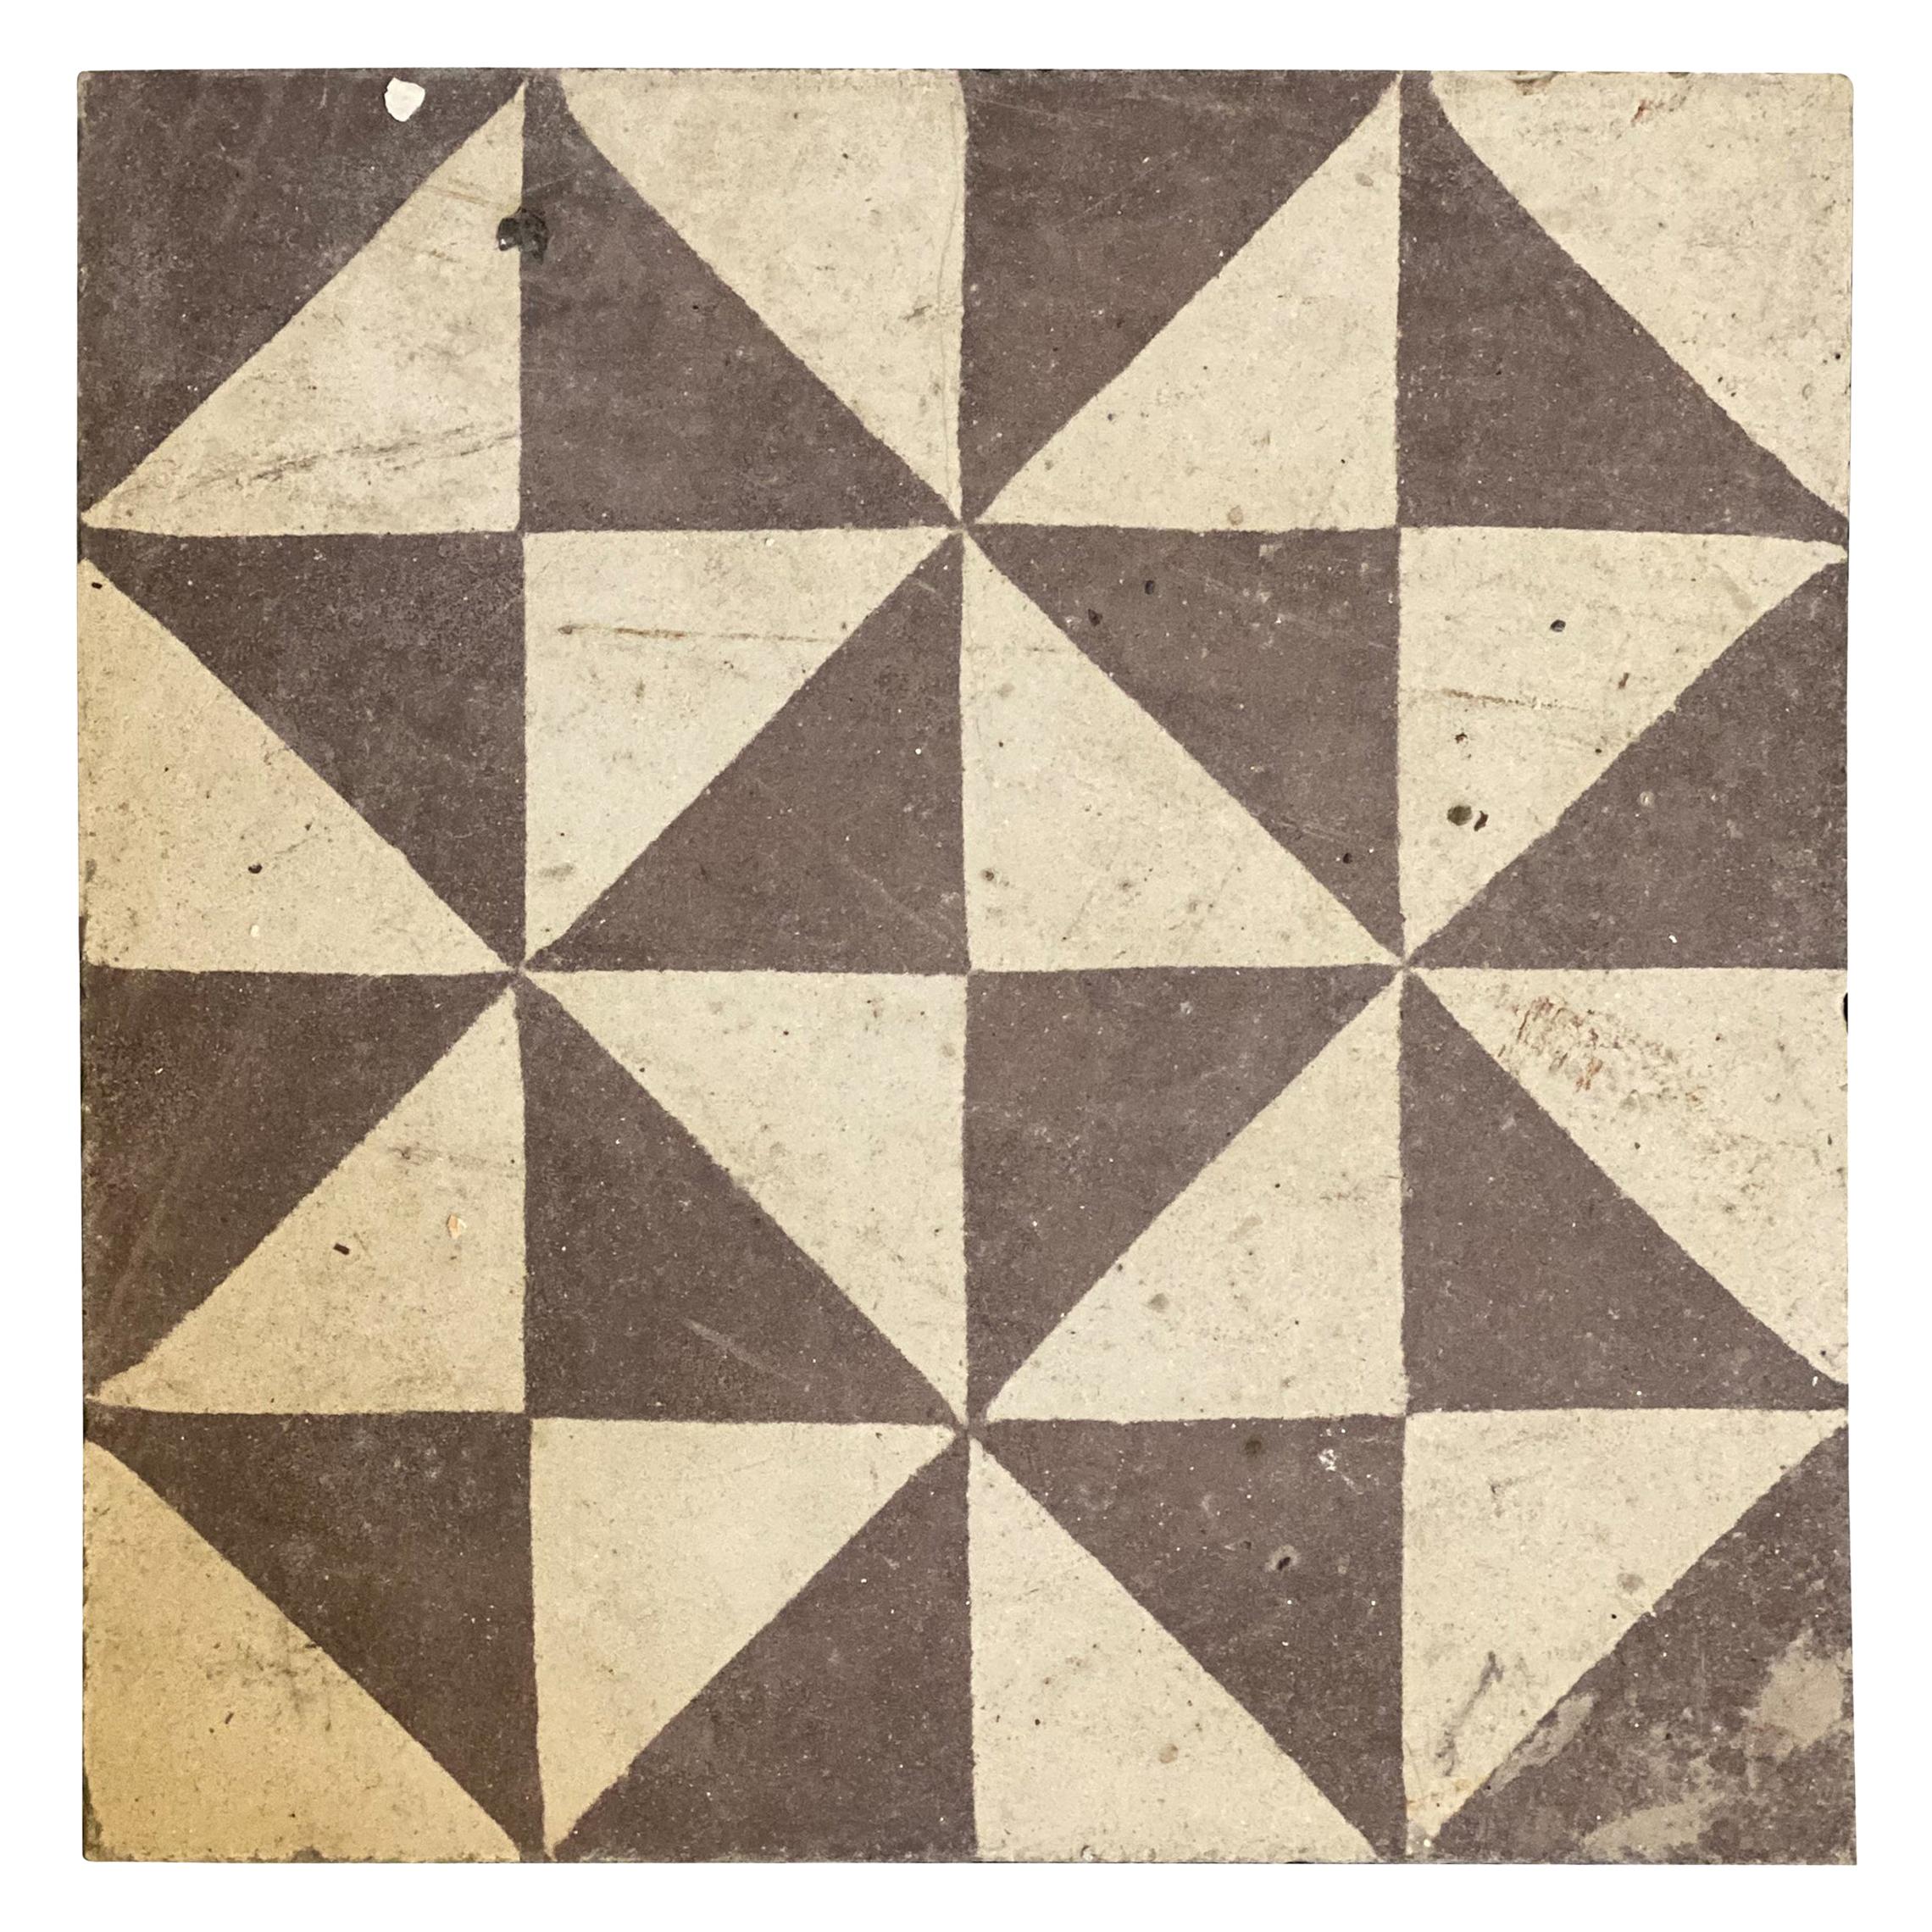 Brown and White Geometric Tiles